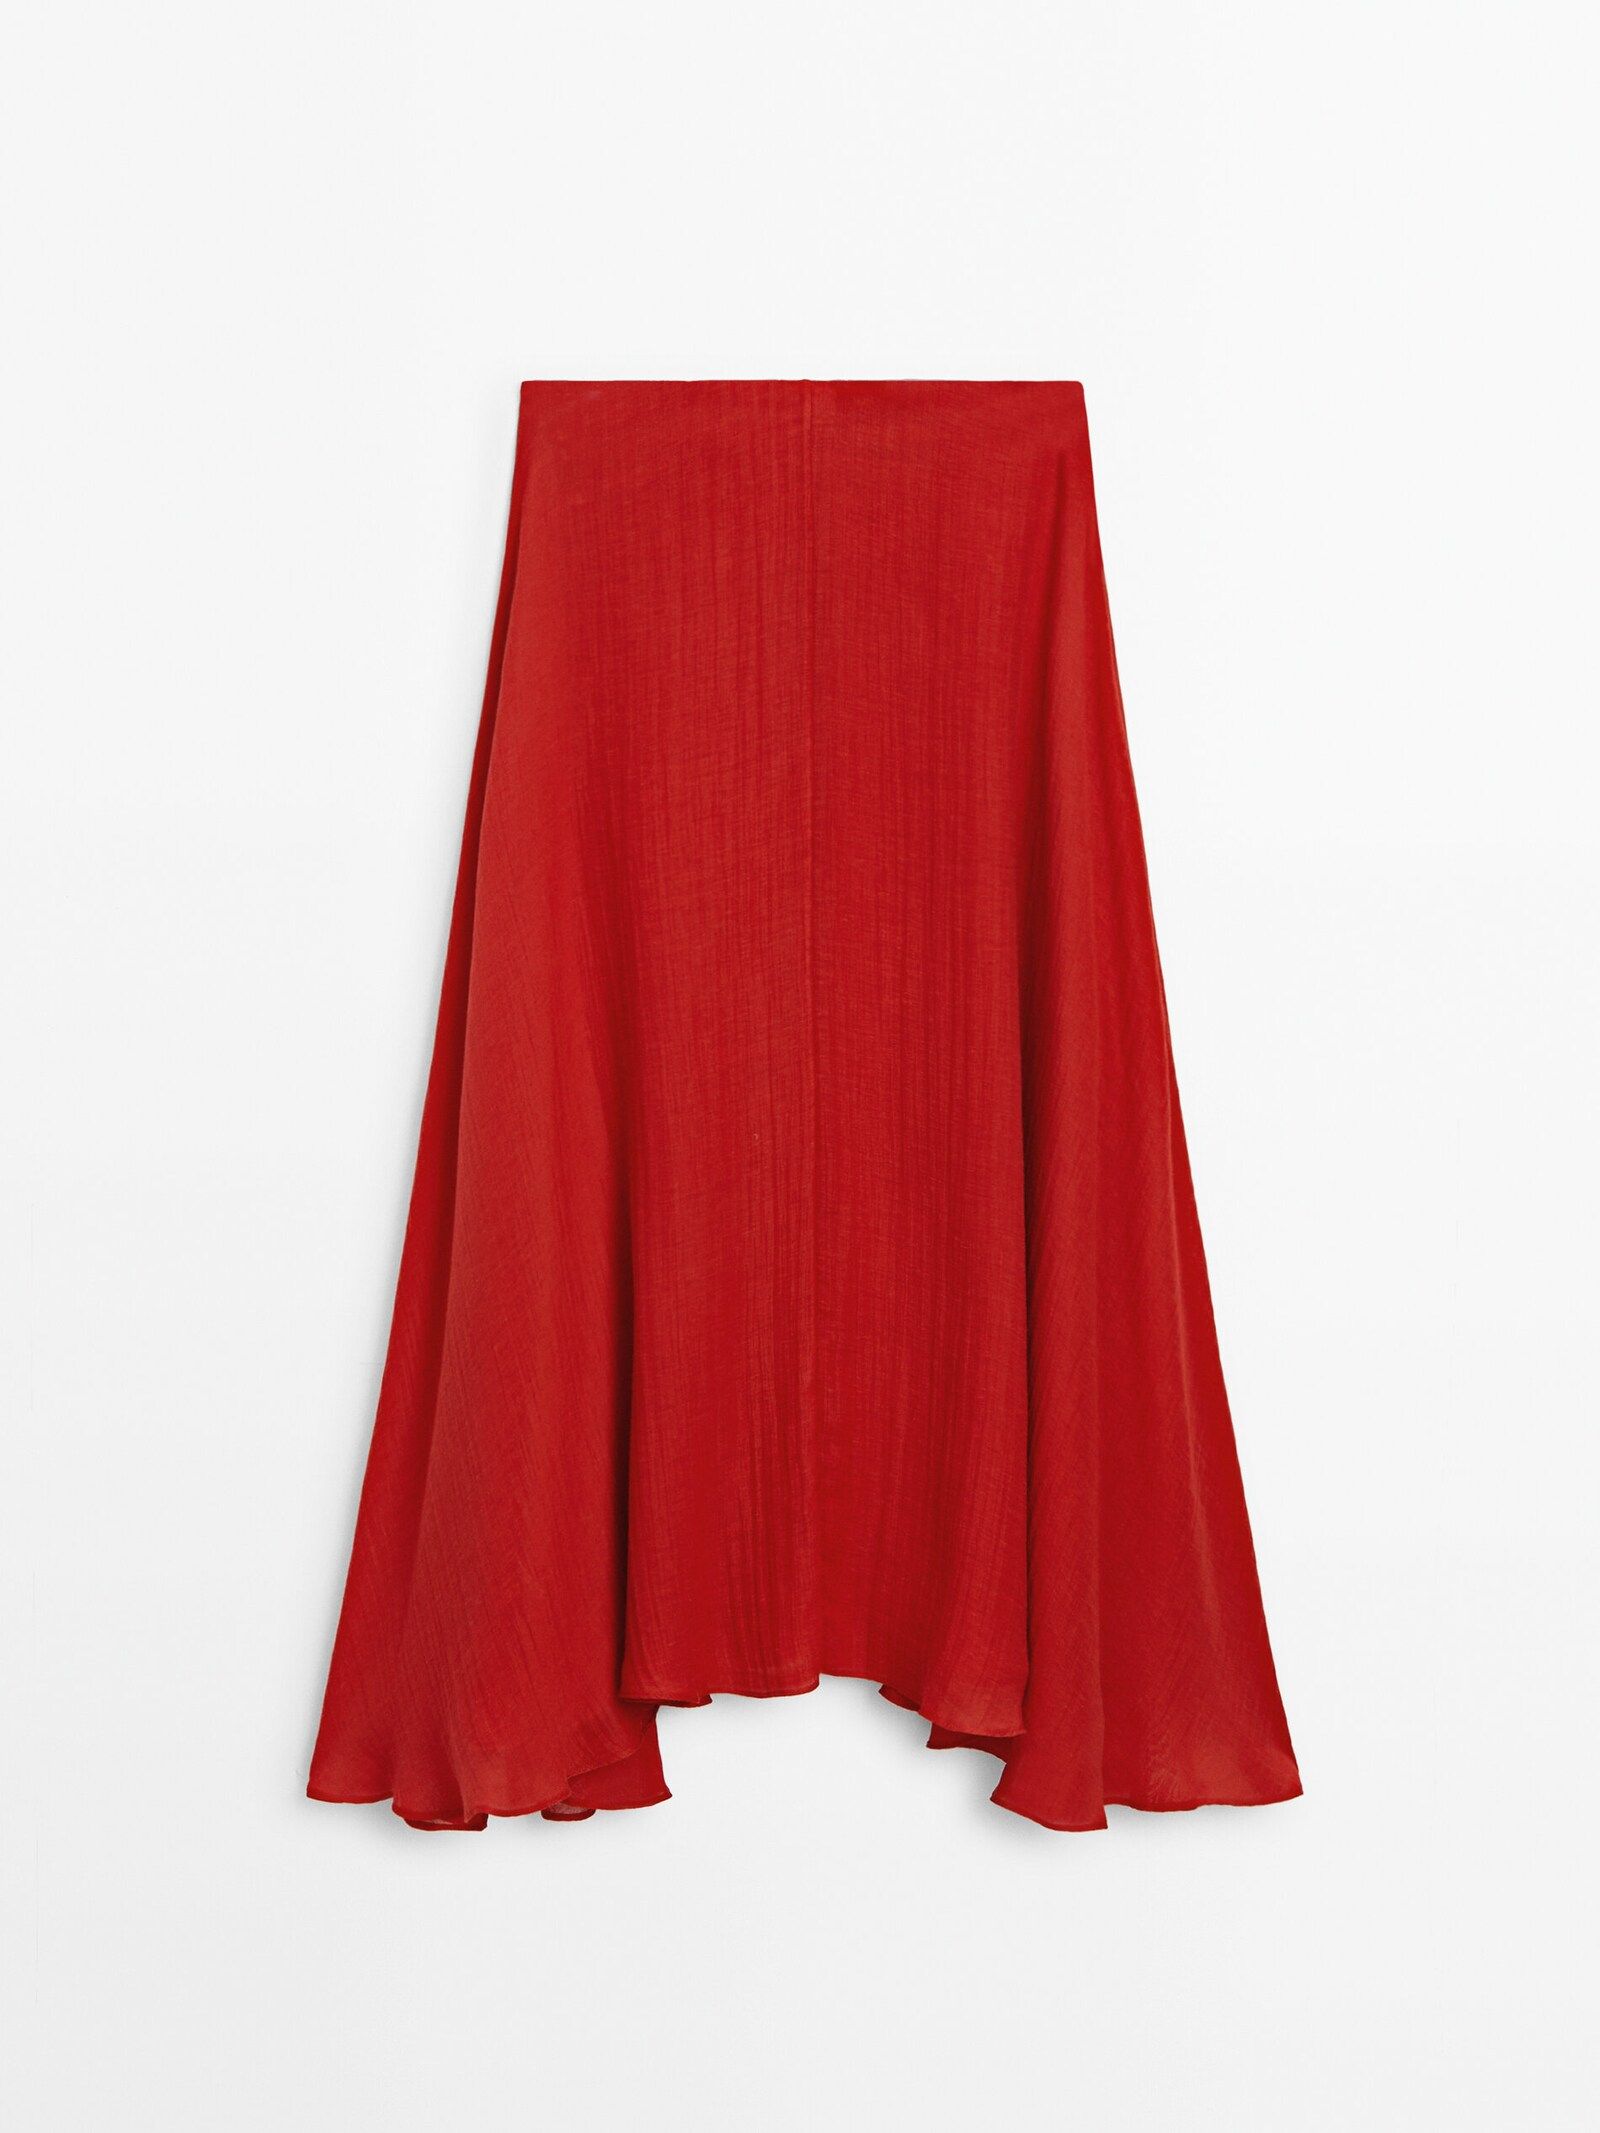 Long flowing skirt - Limited Edition | Massimo Dutti (US)